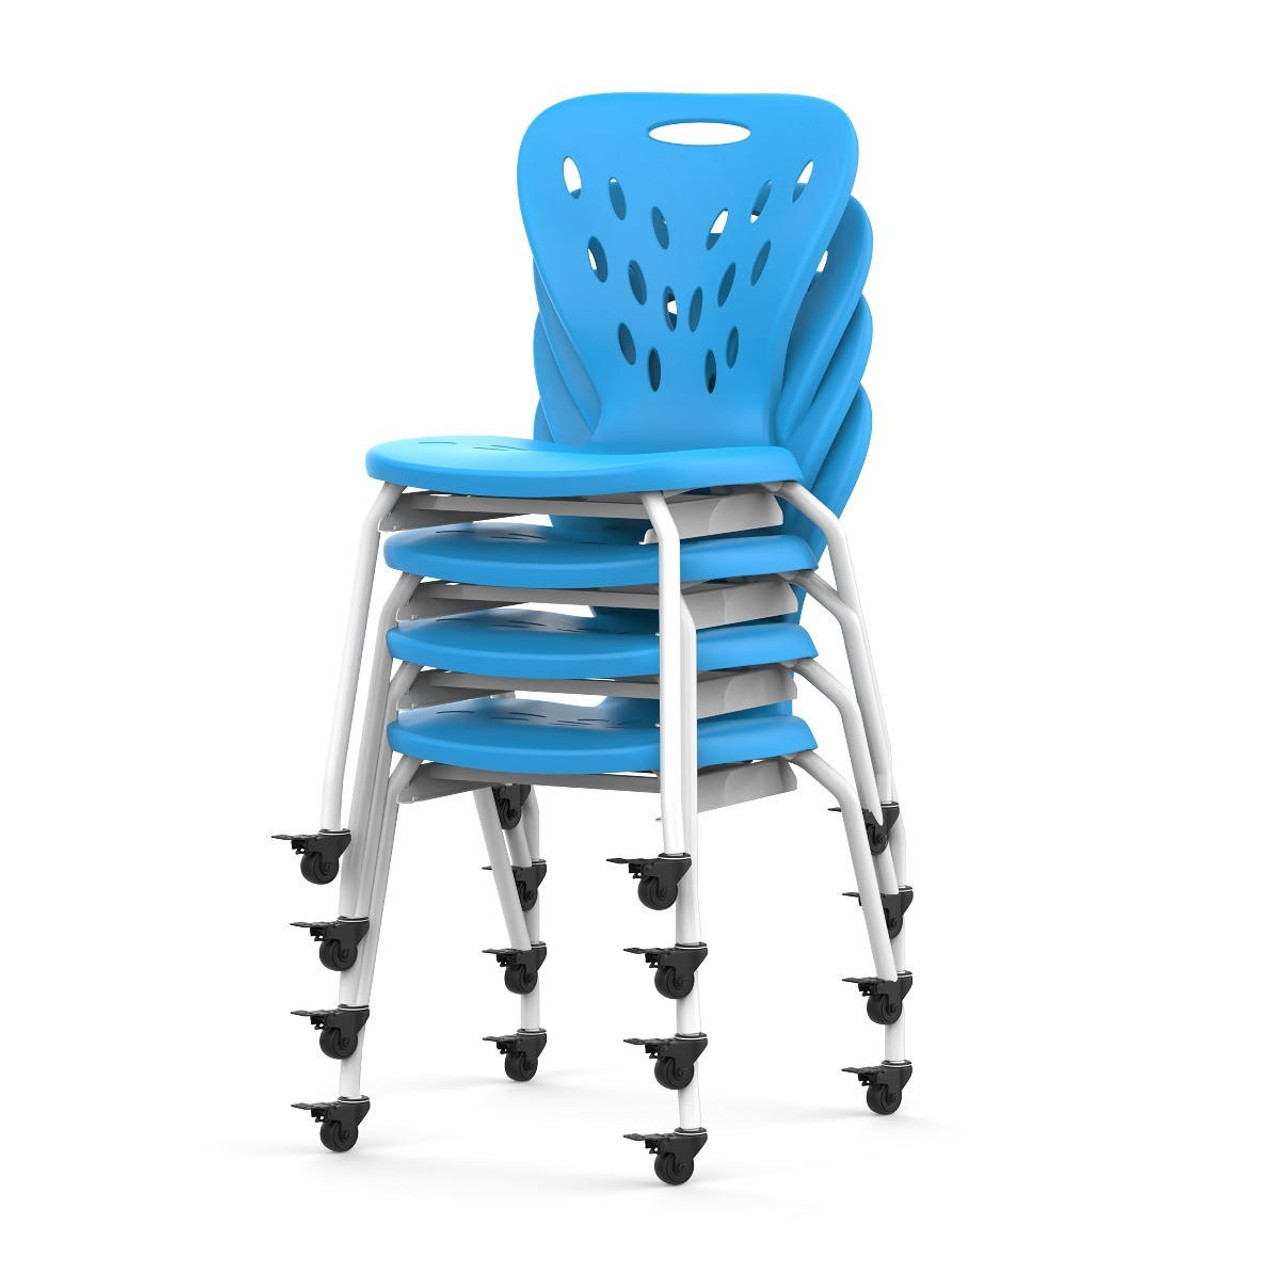 https://cdn11.bigcommerce.com/s-36yz7qwnyo/images/stencil/1280x1280/products/26685/69682/luxor-stackable-school-chair-with-wheels-and-storage__04211.1683134073.jpg?c=1